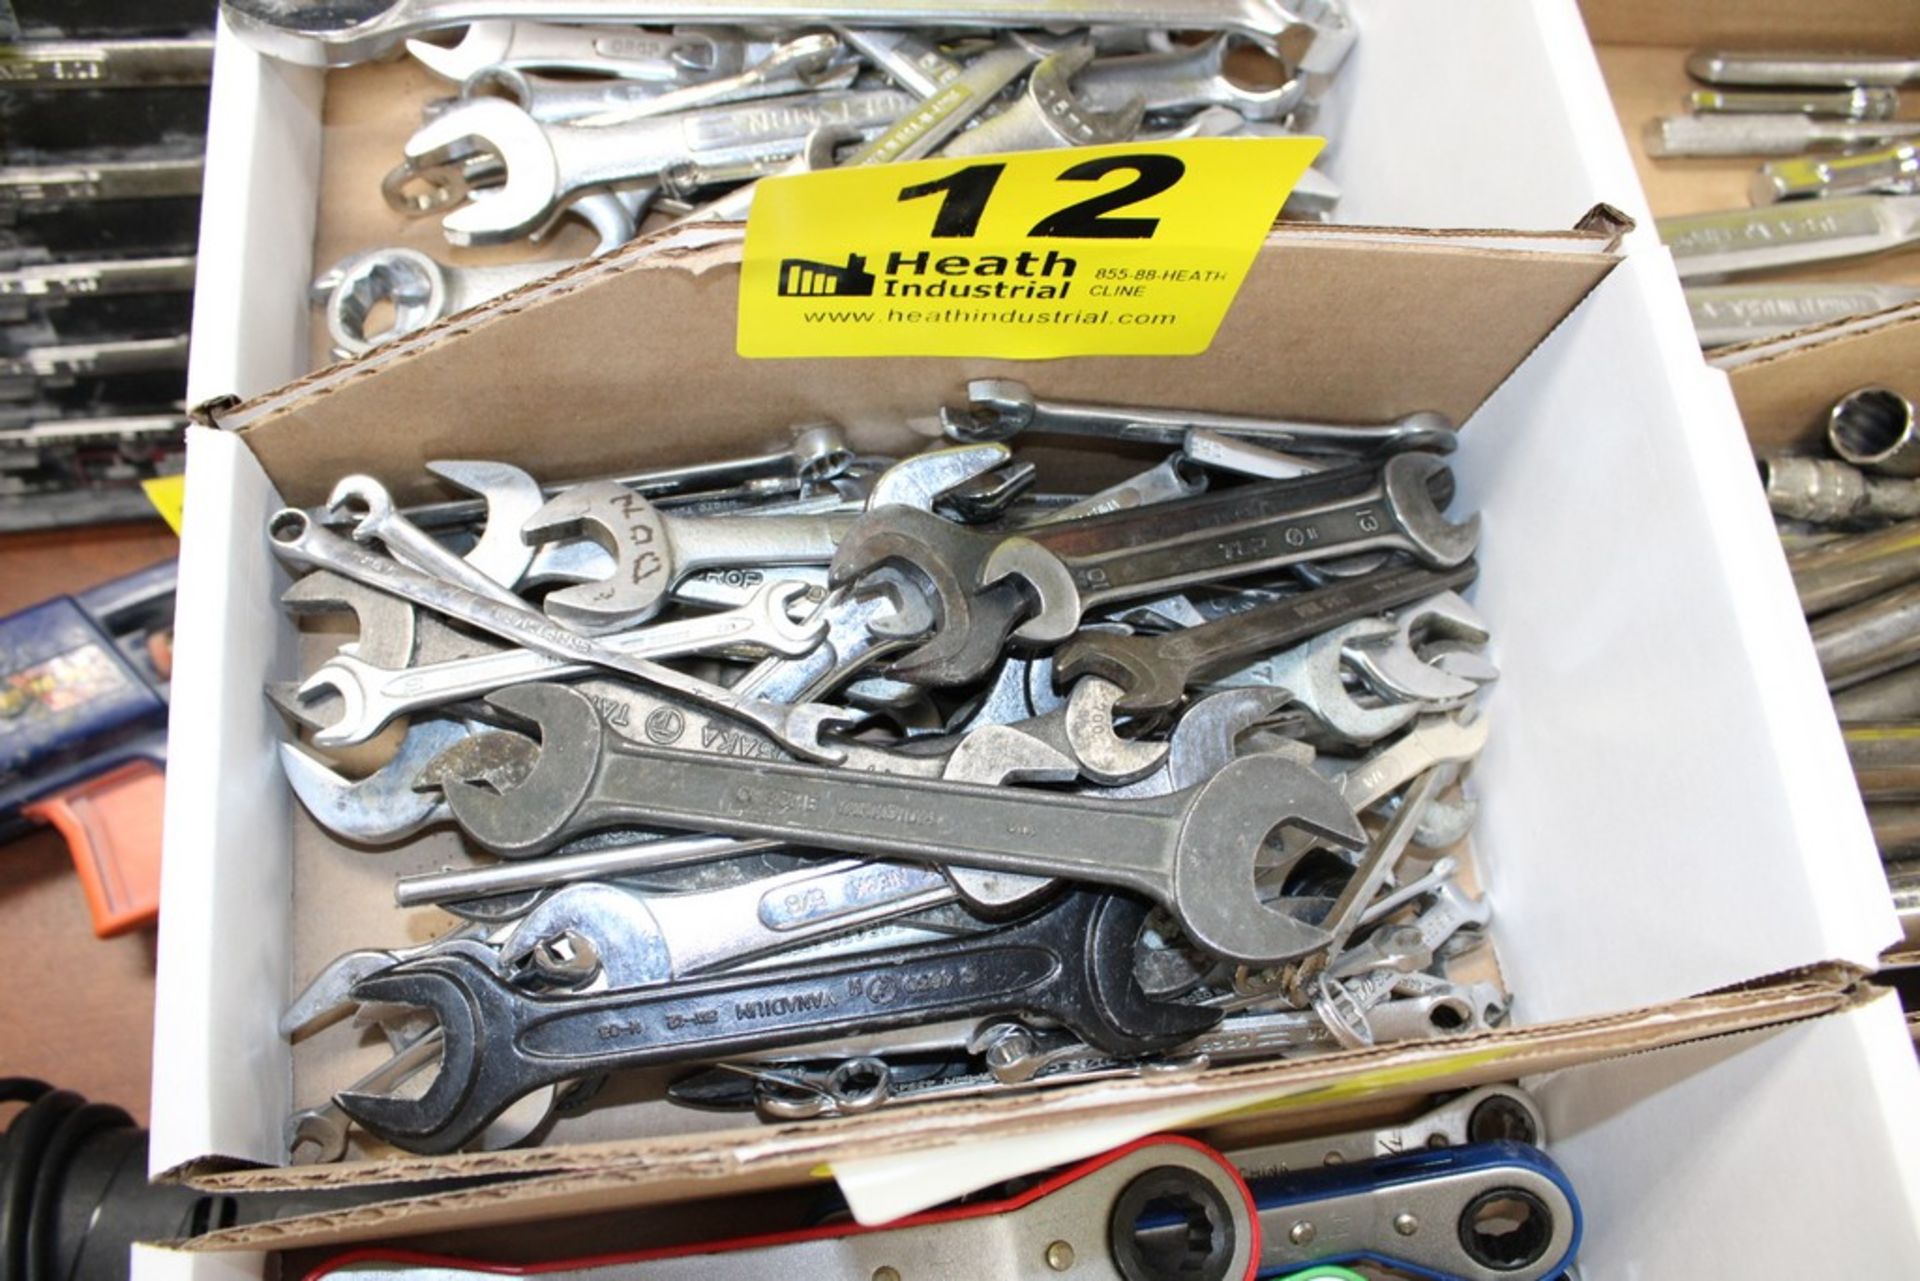 ASSORTED OPEN END WRENCFHES IN BOX